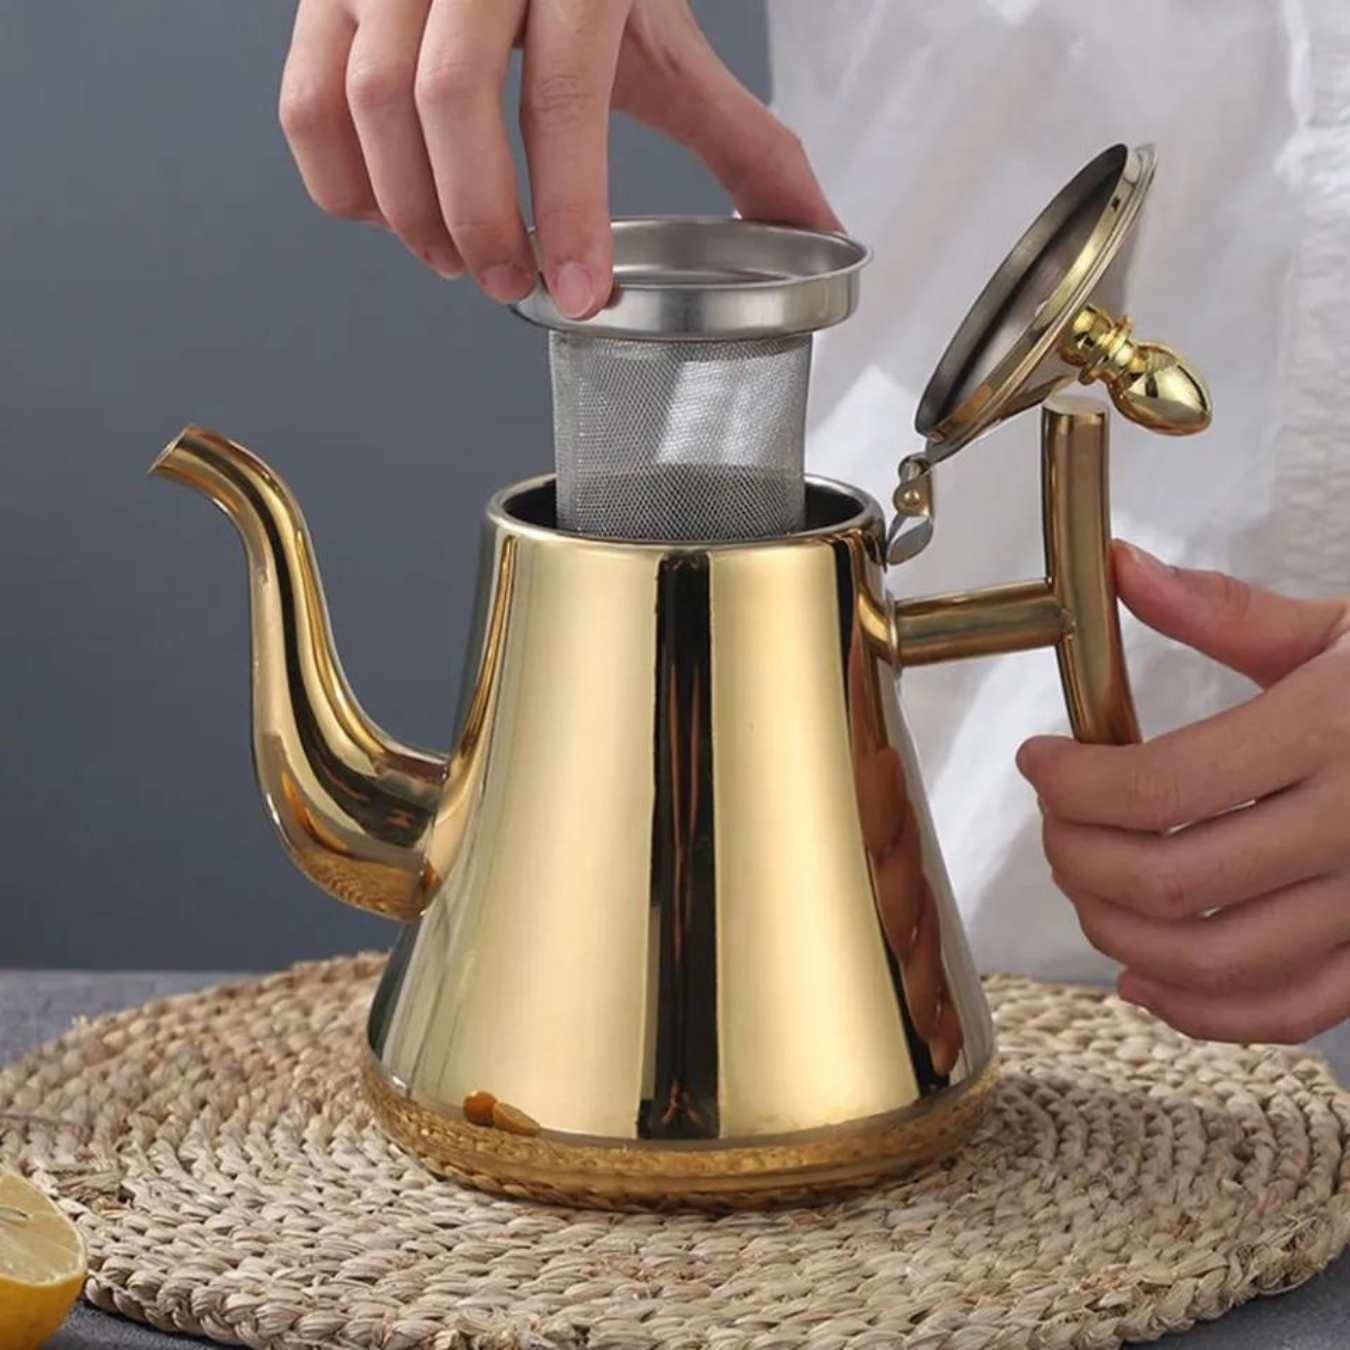 How To Use A Tea Infuser Kettle